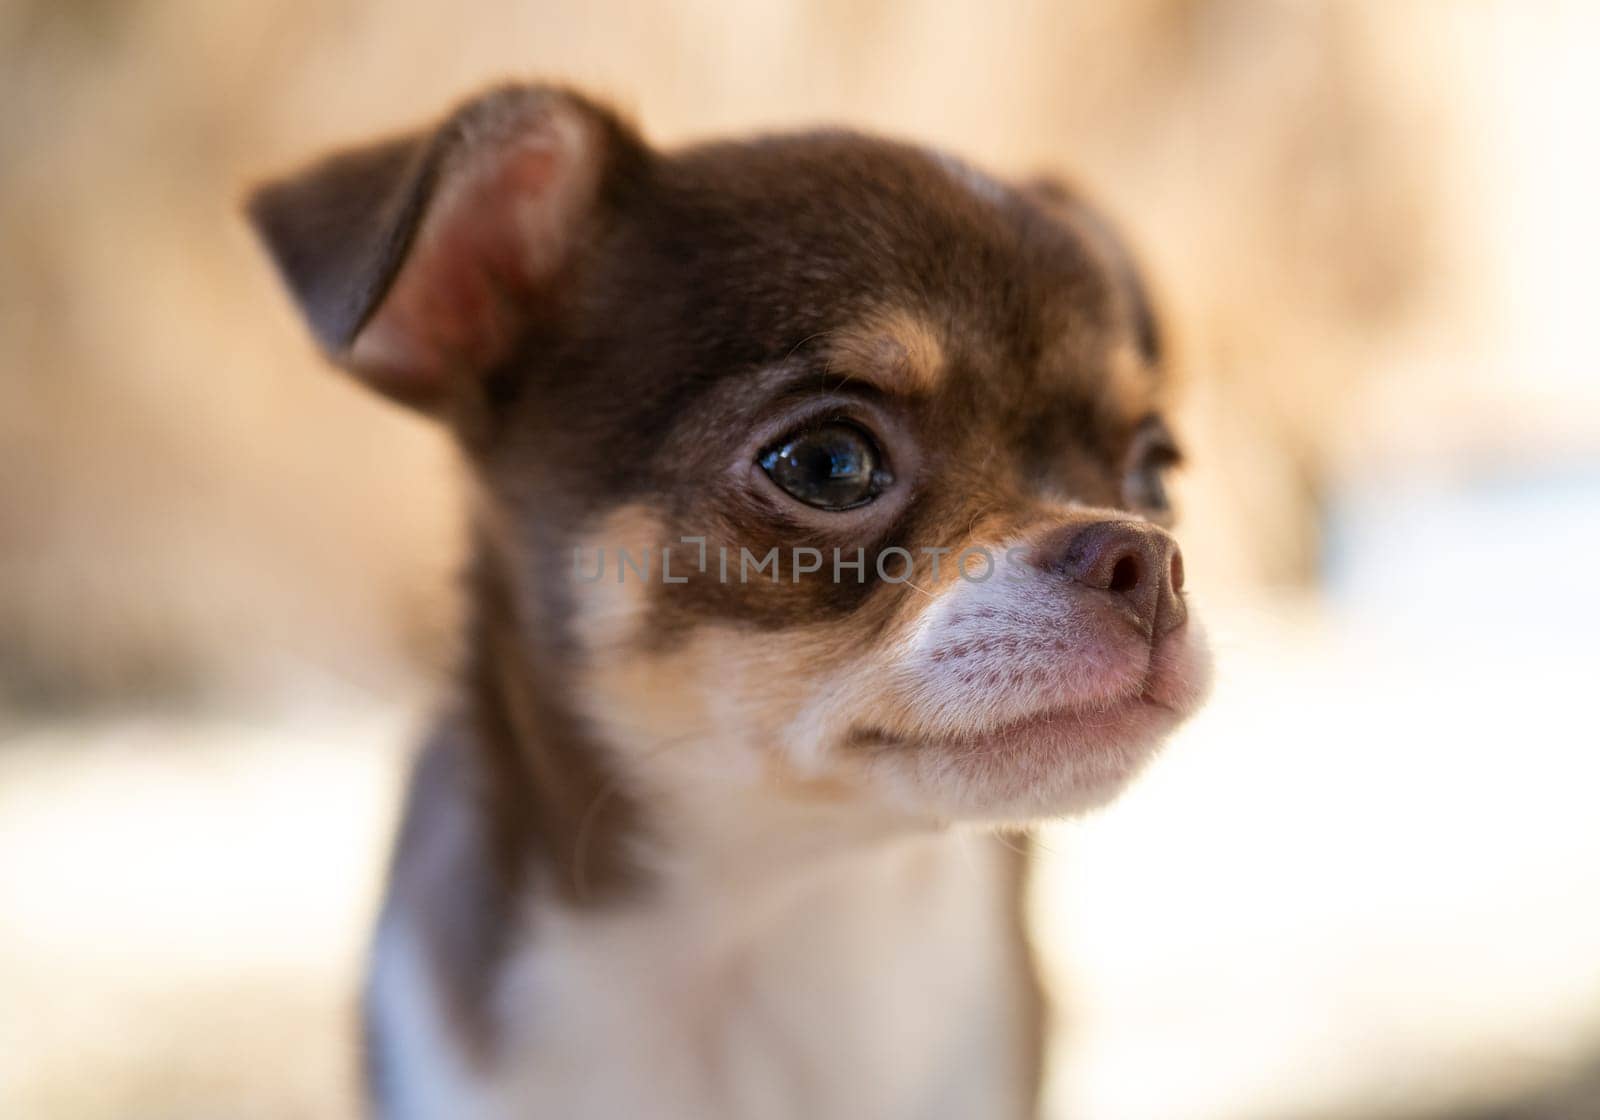 A profile view of a contemplative brown and white Chihuahua puppy, with soft focus background enhancing its thoughtful expression.